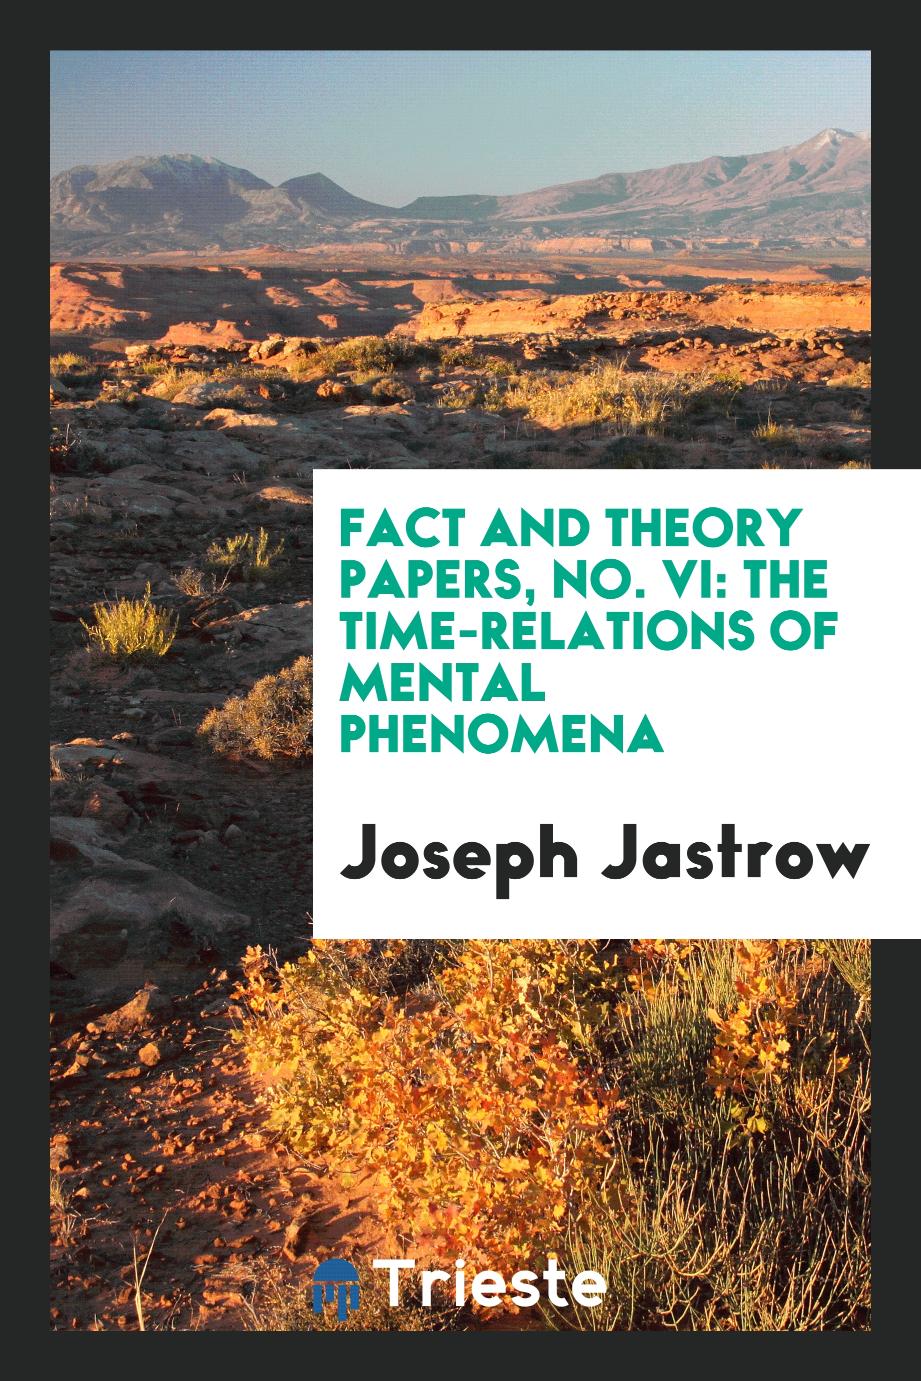 Fact and Theory papers, No. VI: The Time-relations of Mental Phenomena